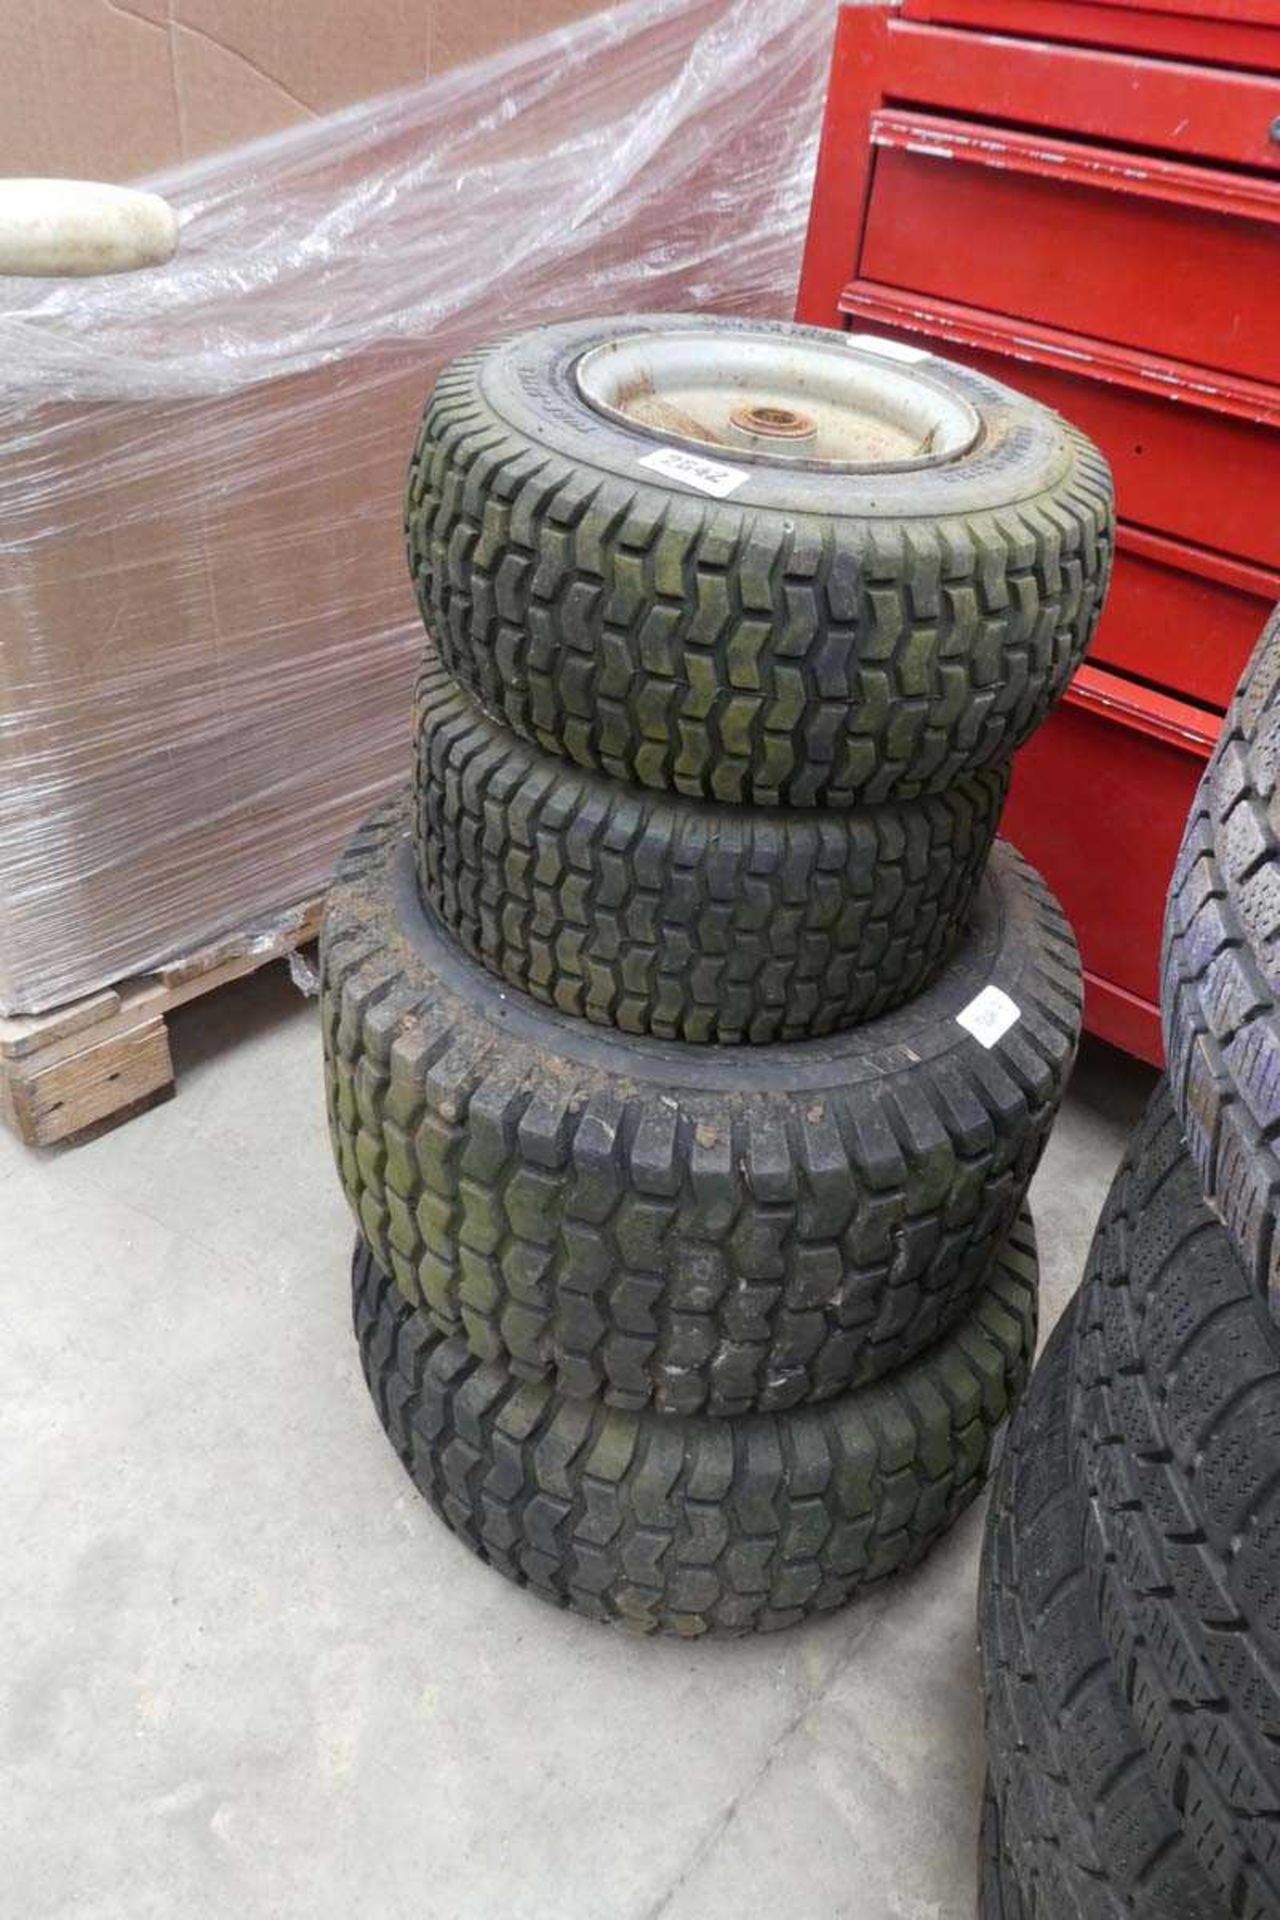 4 various sized tyres